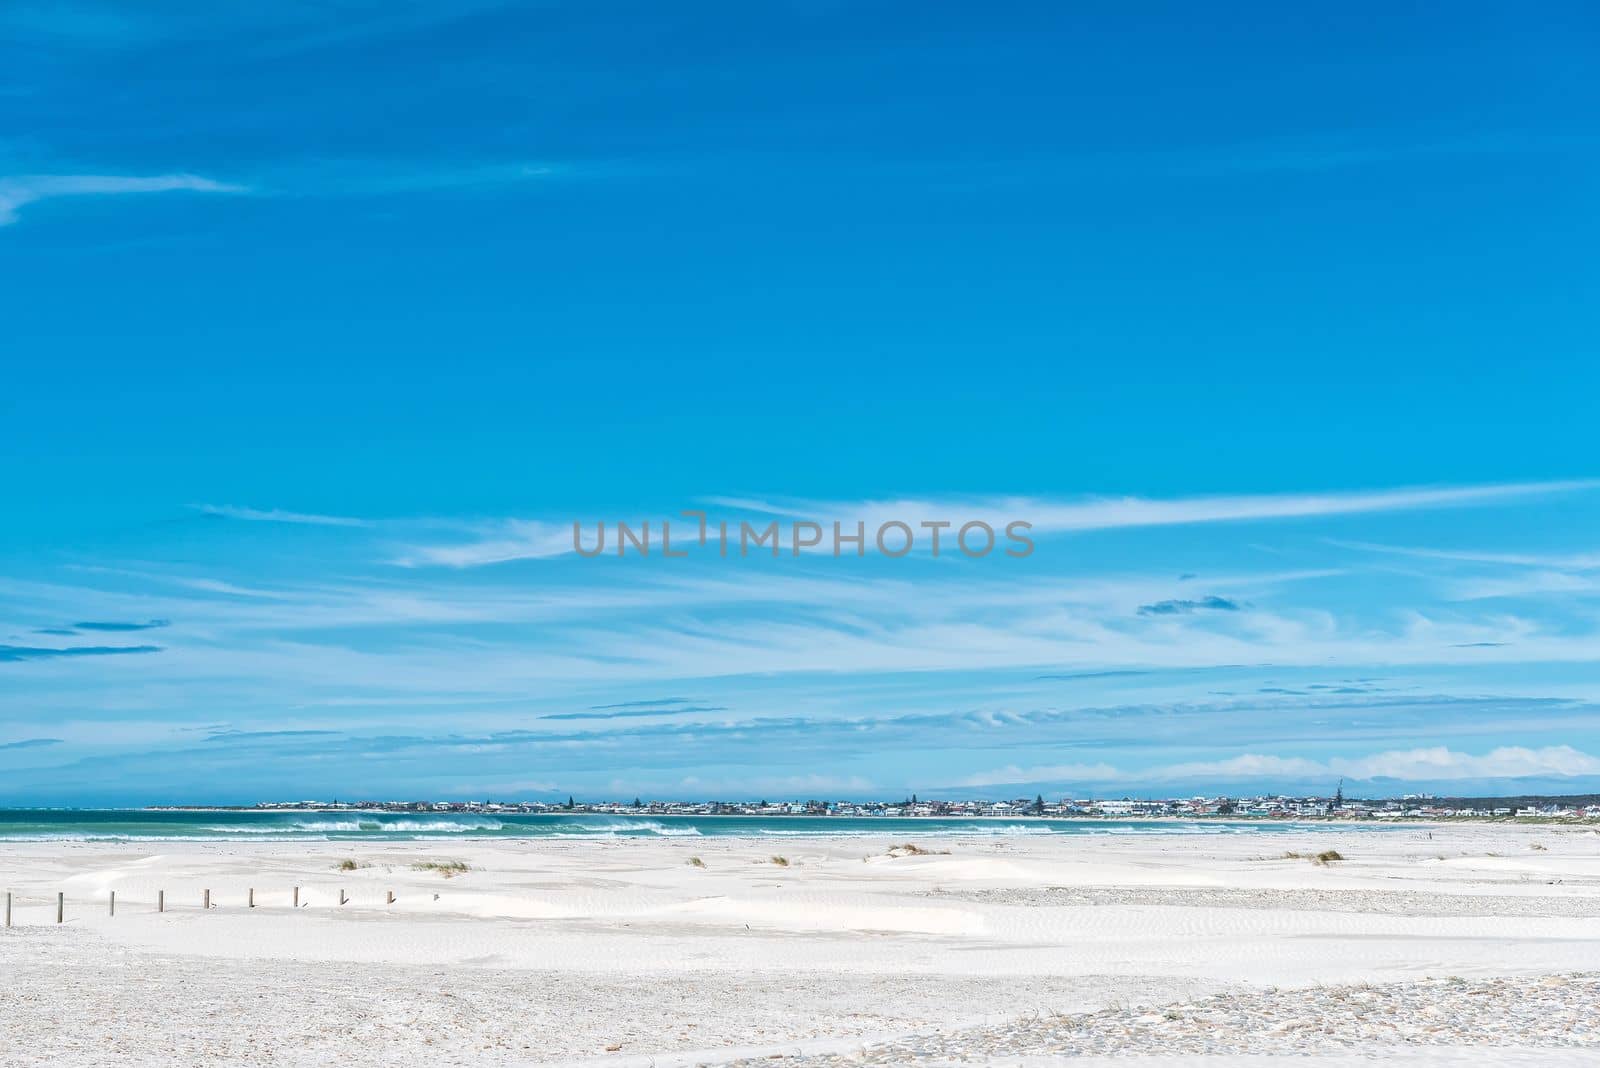 Struisbaai is visible from the Plaat, one of the longest uninterrupted beaches in the Southern Hemisphere